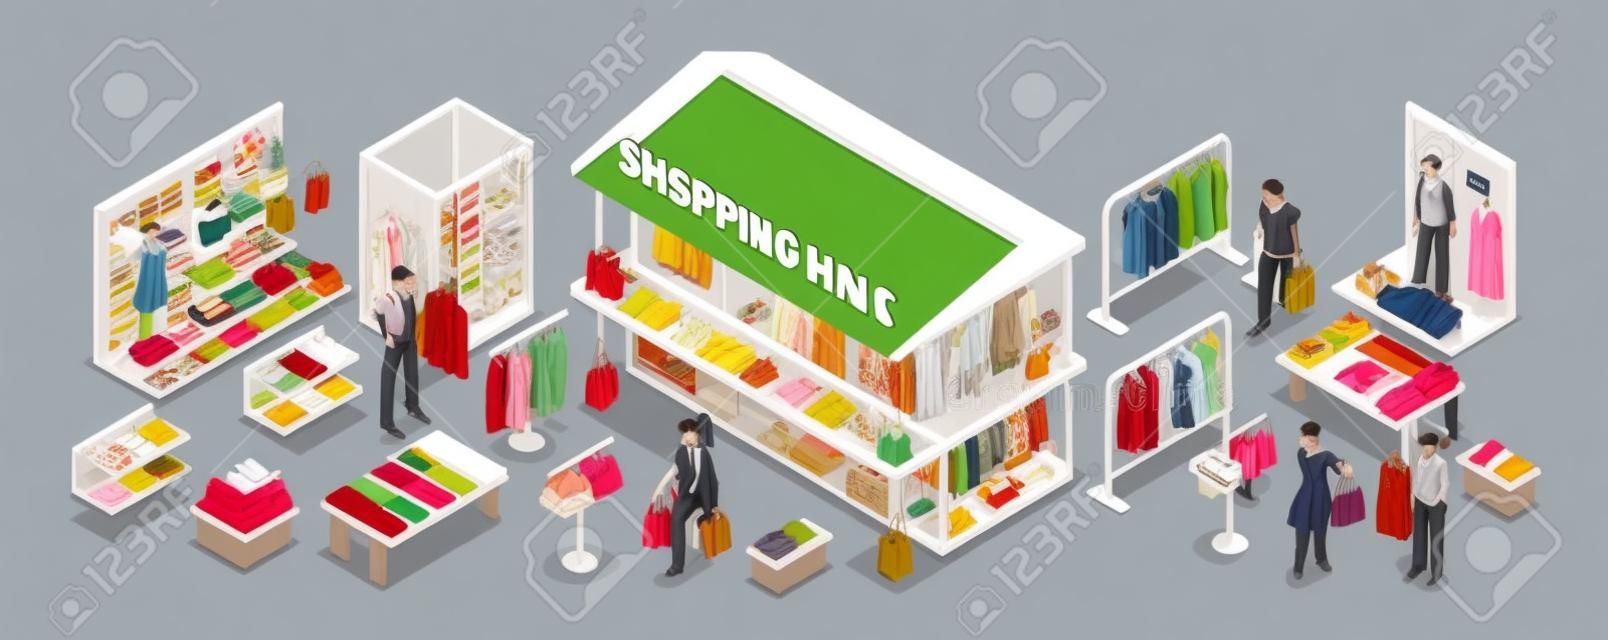 Clothing department store isometric  horizontal composition with shopping mall building fitting room display stands customers vector illustration